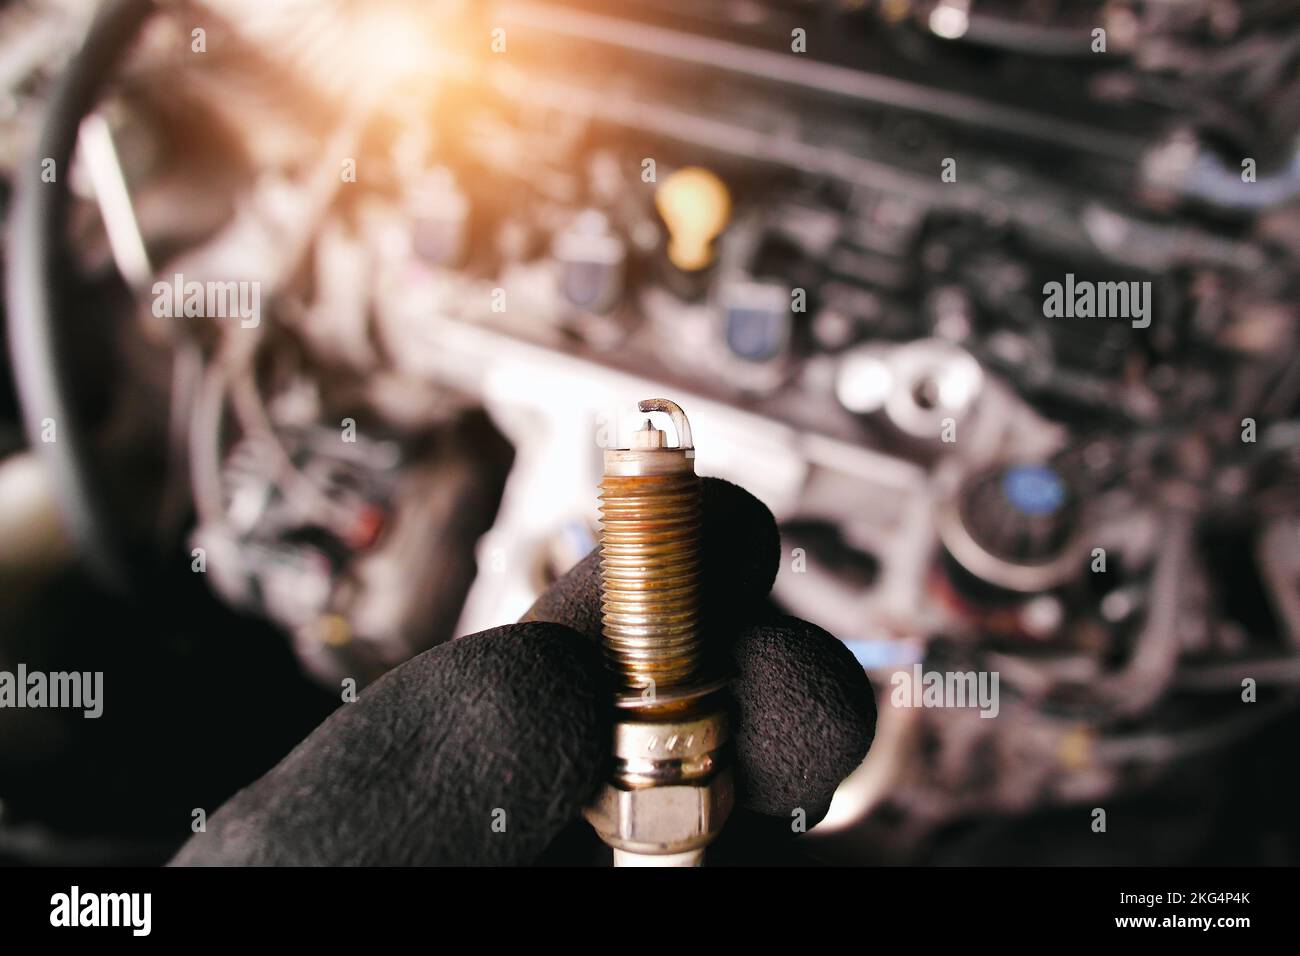 Close up of car iridium spark plugs damaged by heavy use of the car engine ignition system, engine compartment blurred on background with sunlight Stock Photo